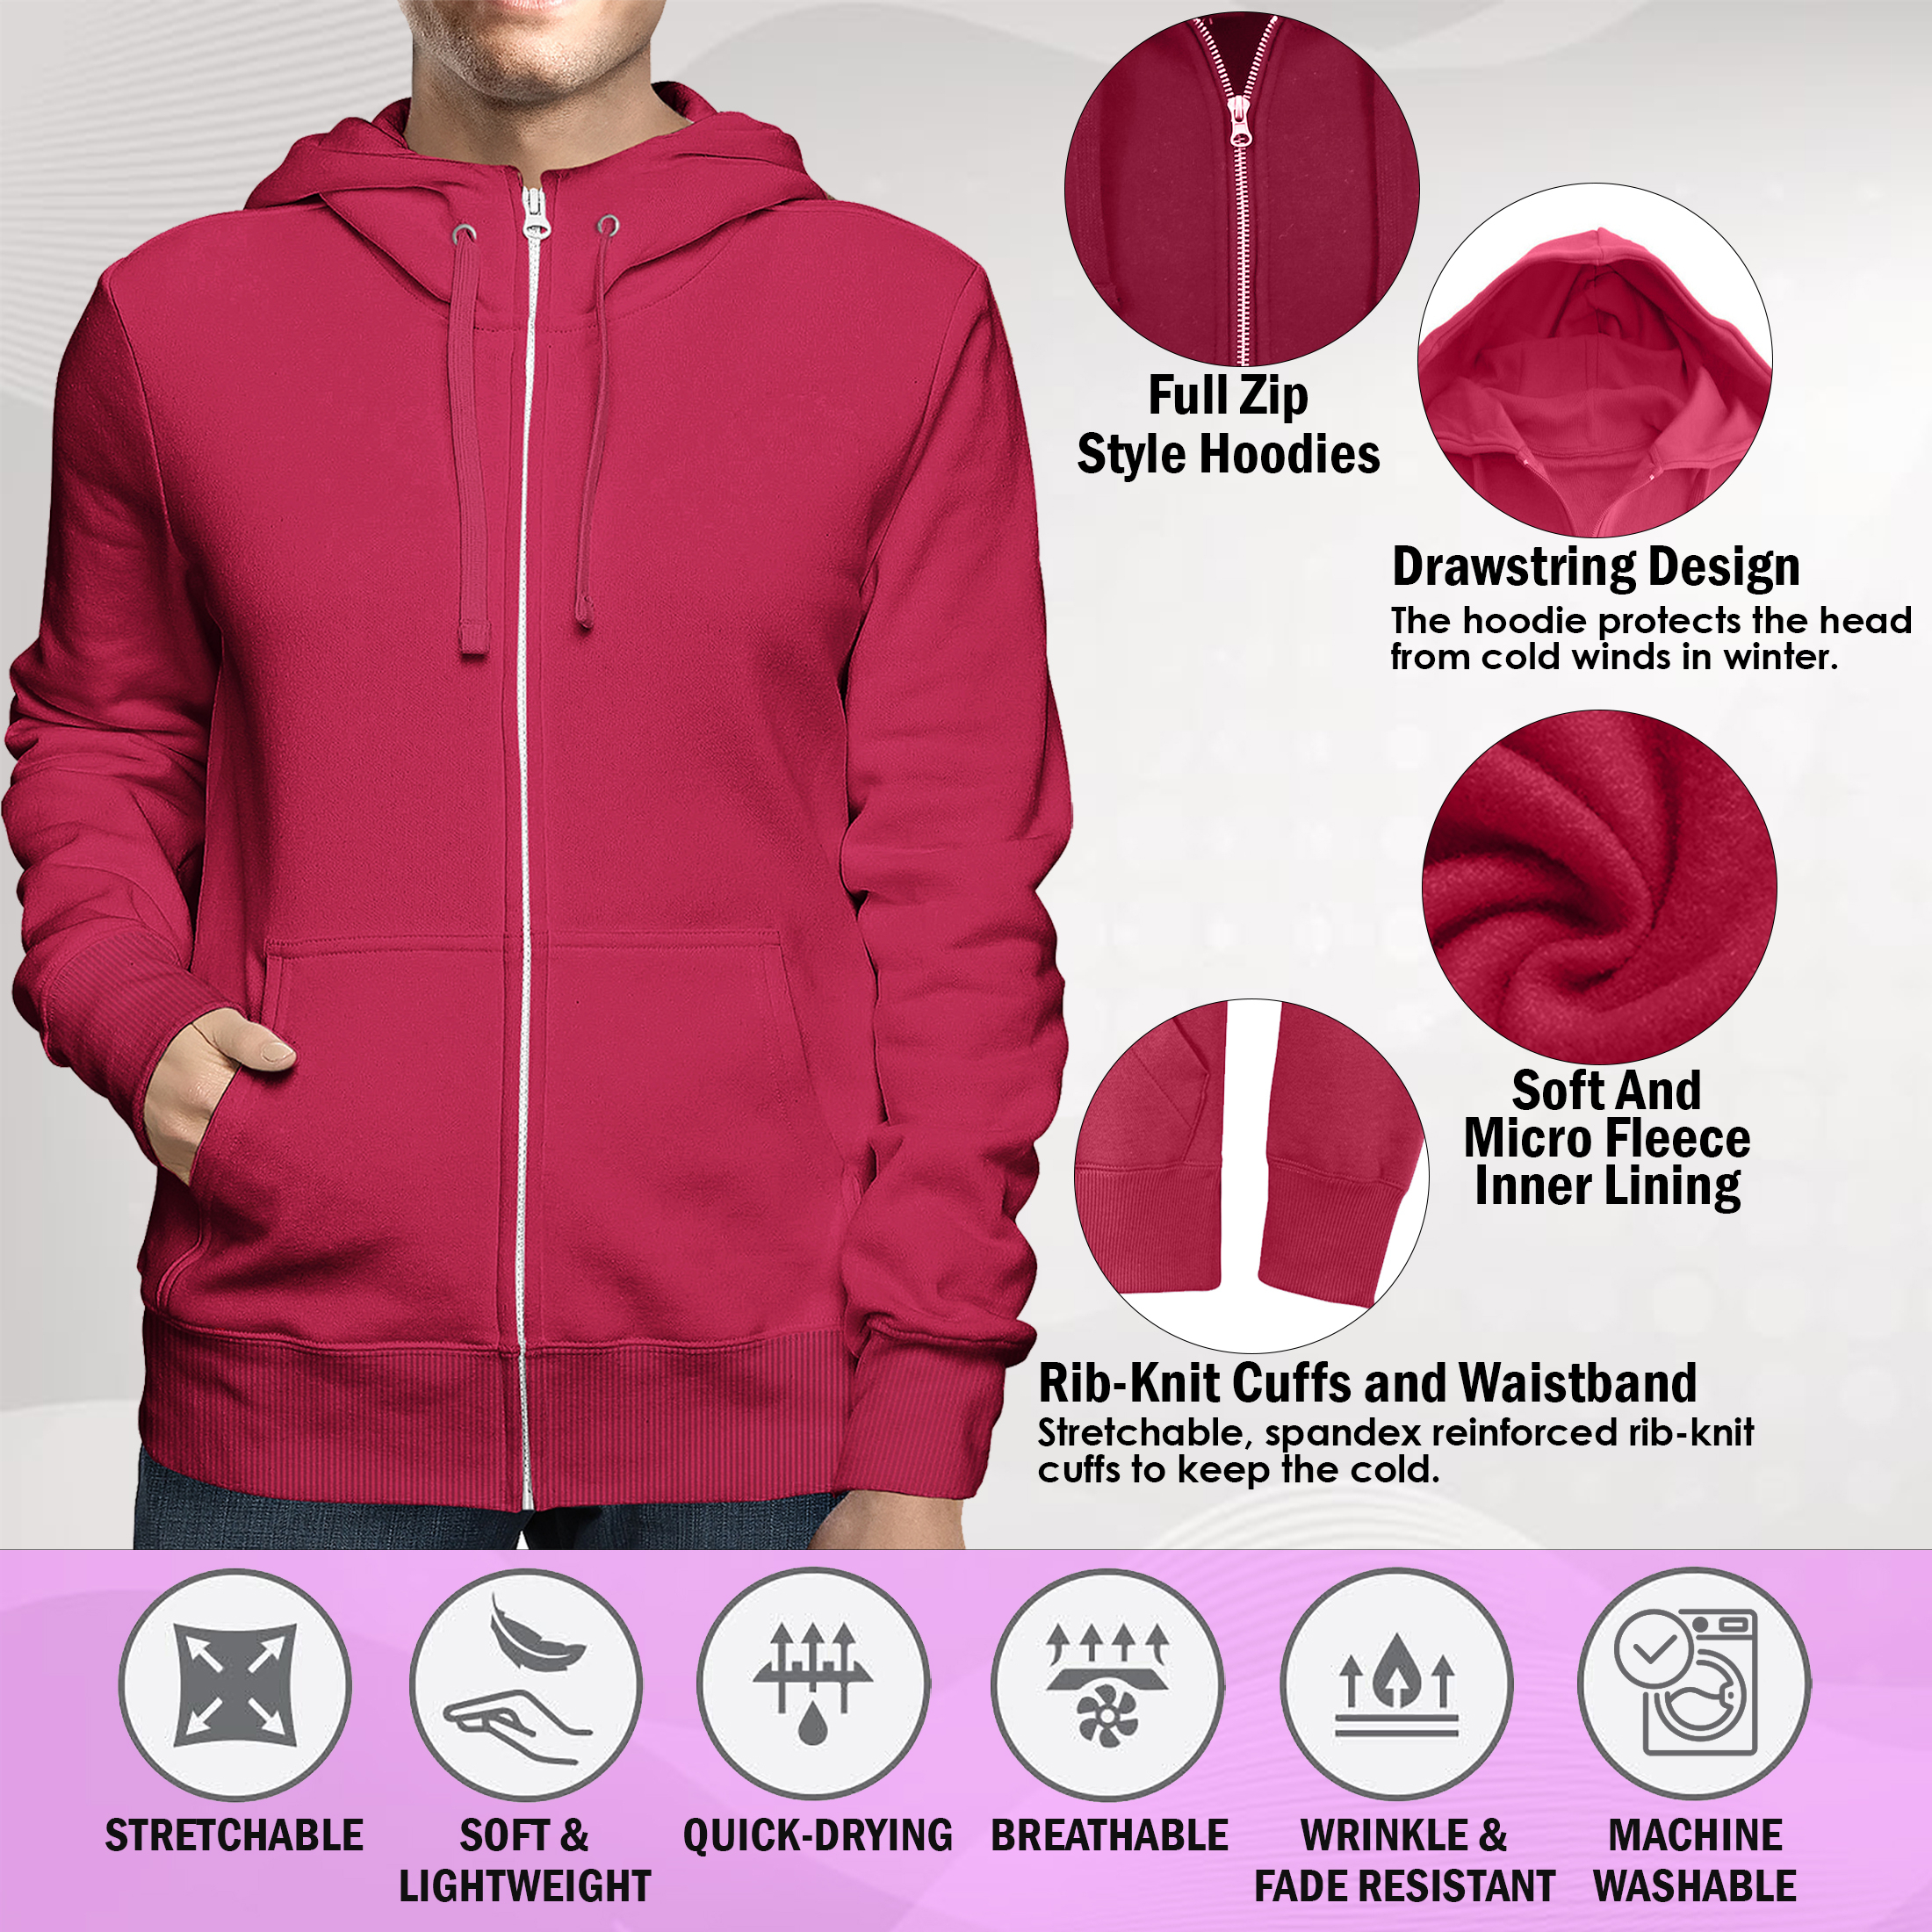 2-Pack: Men's Full Zip Up Fleece-Lined Hoodie Sweatshirt (Big & Tall Size Available) - Burgundy & Timberland, 3x-large